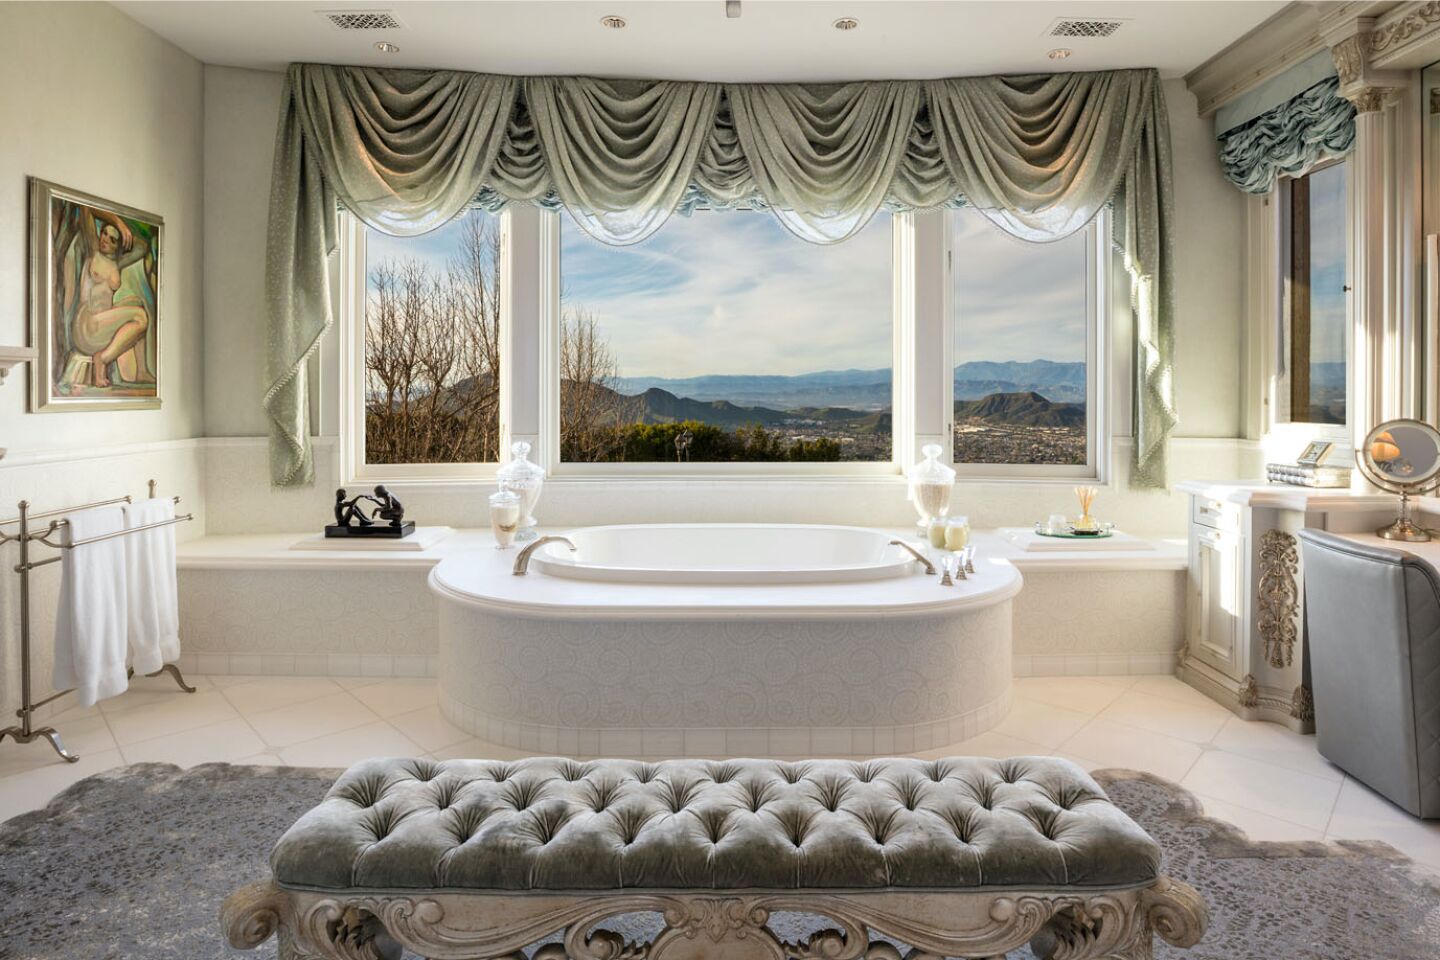 A tub dominates the primary bathroom, with large window, vanity area and fireplace.